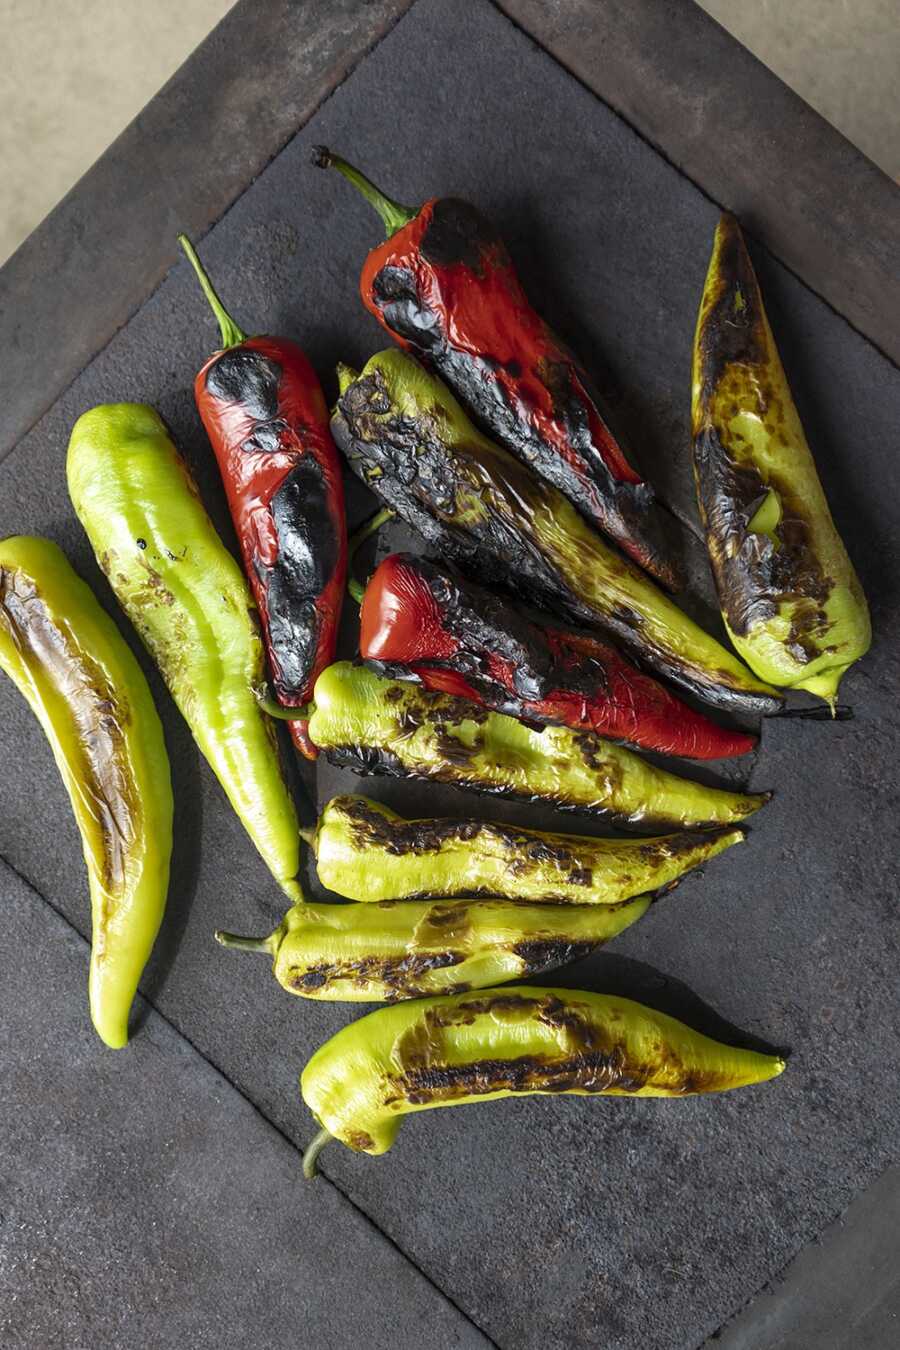 Green and red banana peppers charring on a grill